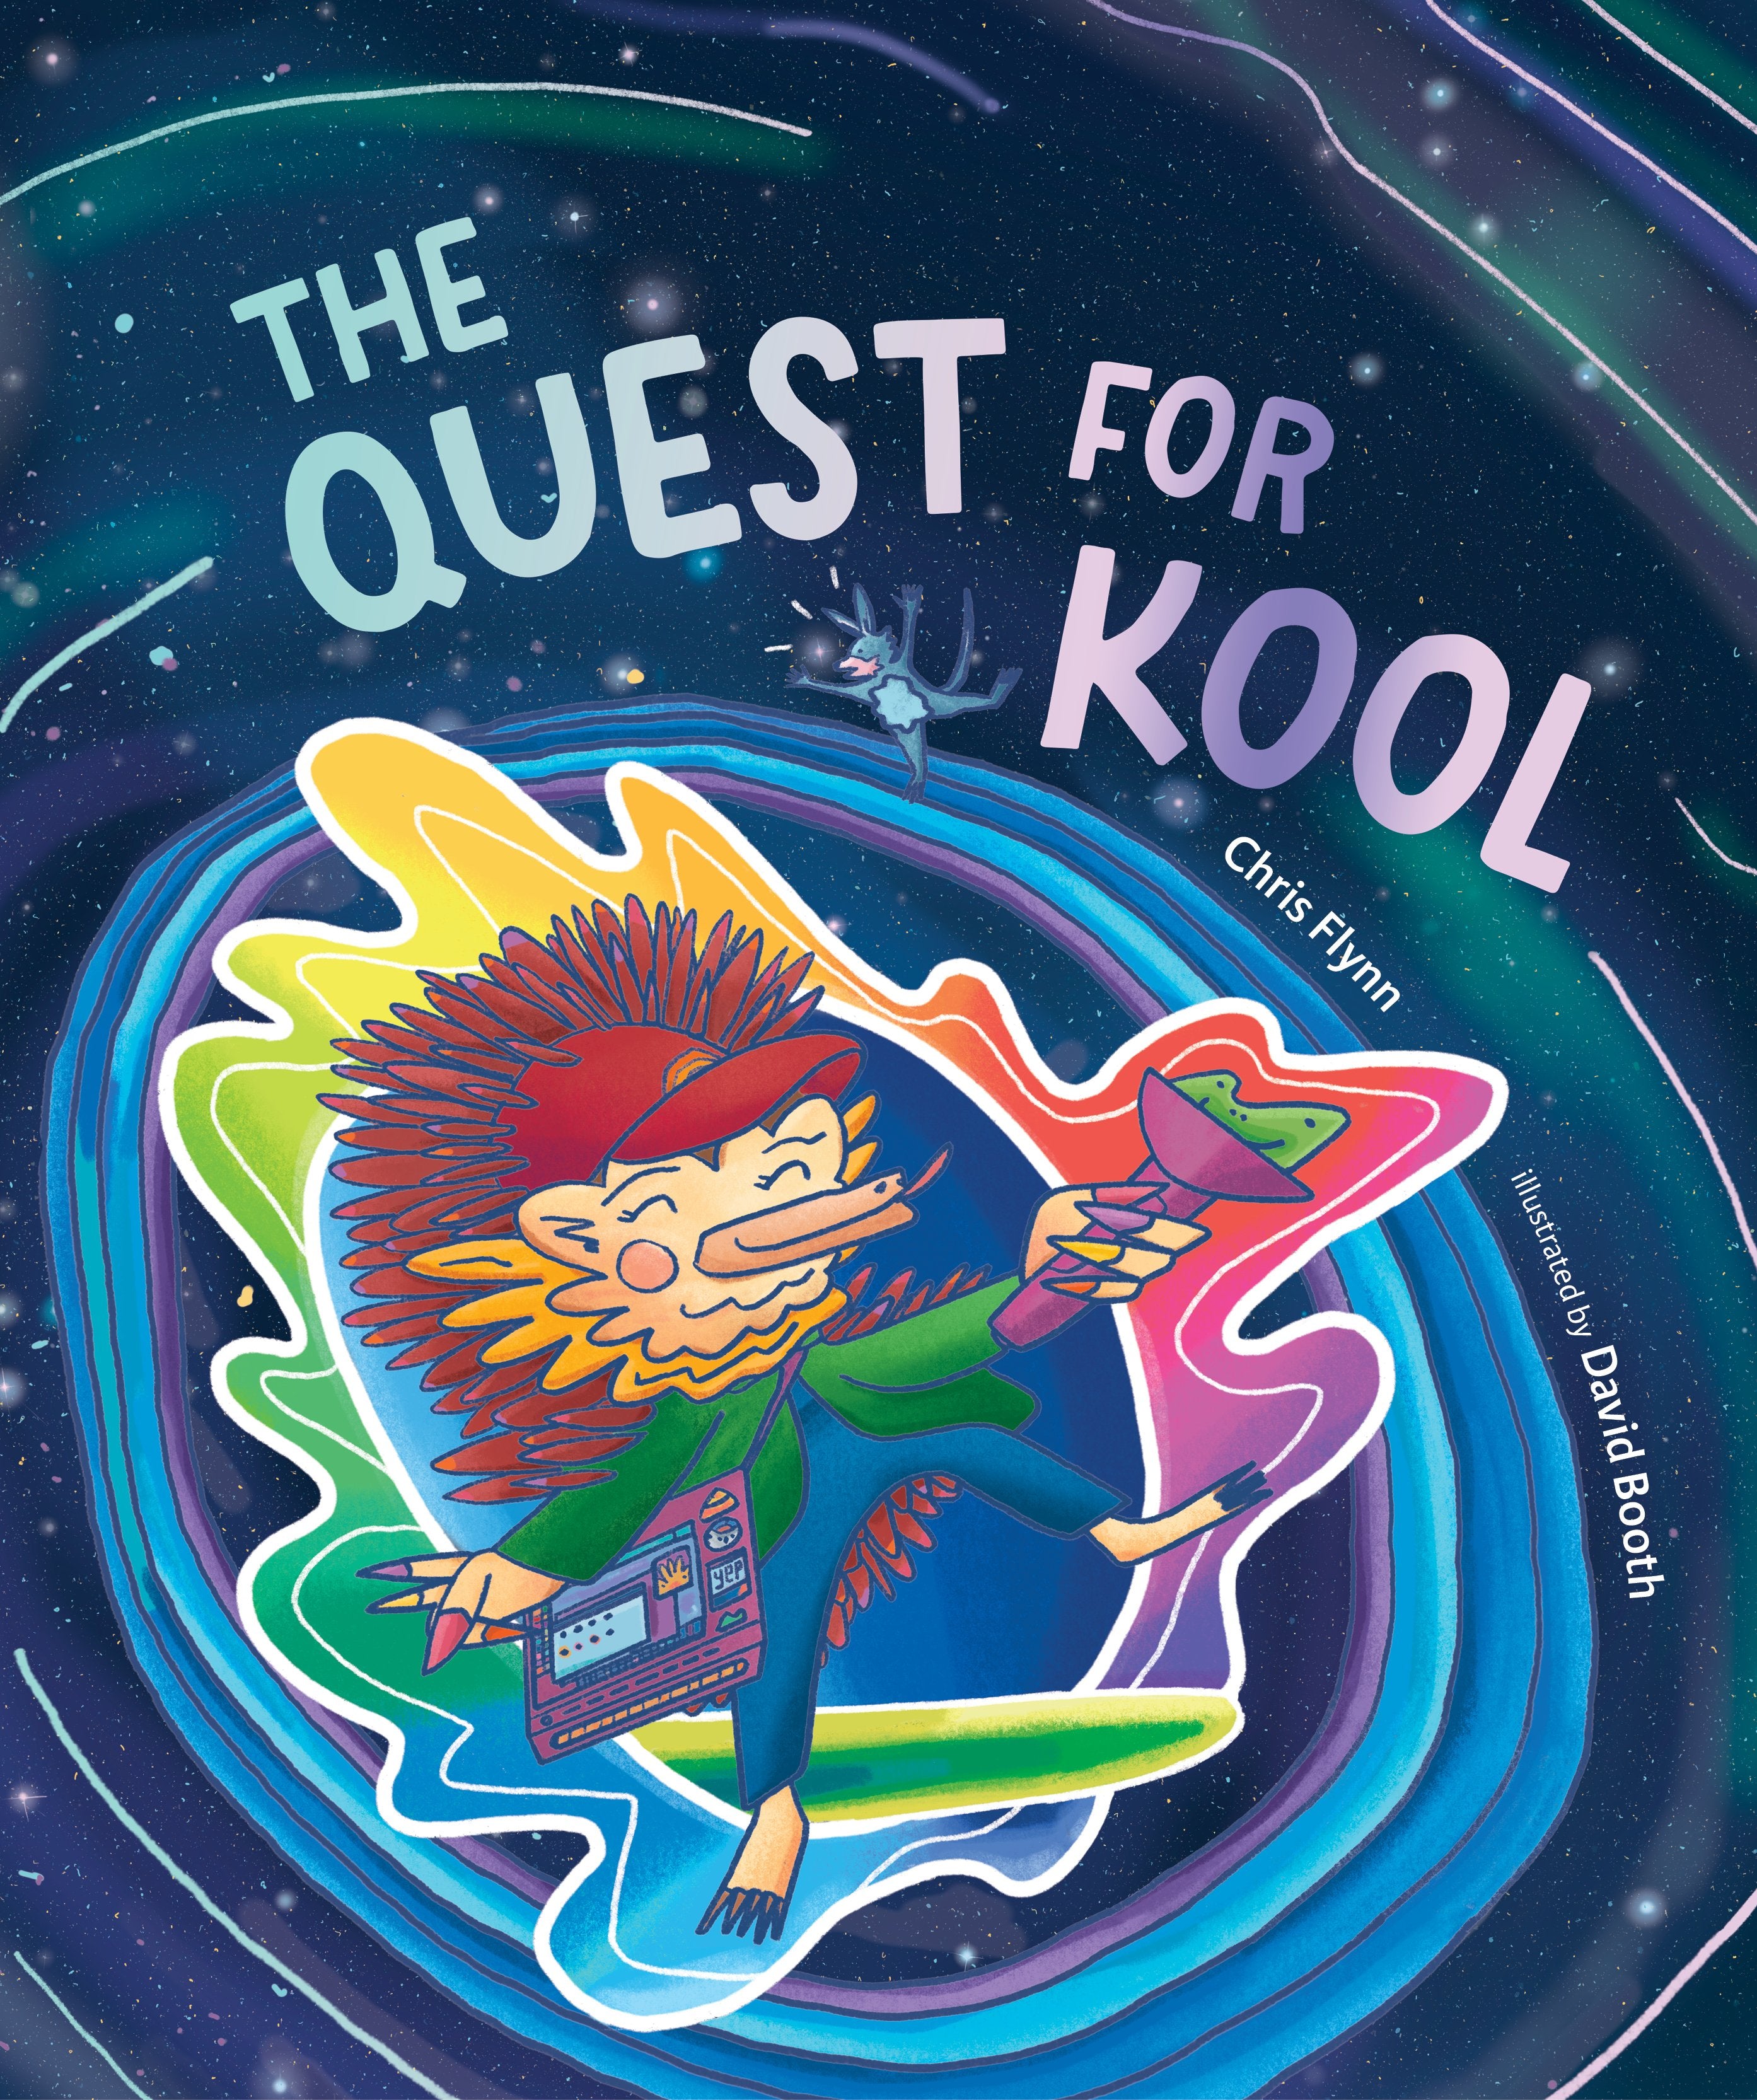 The Quest for Kool by Chris Flynn